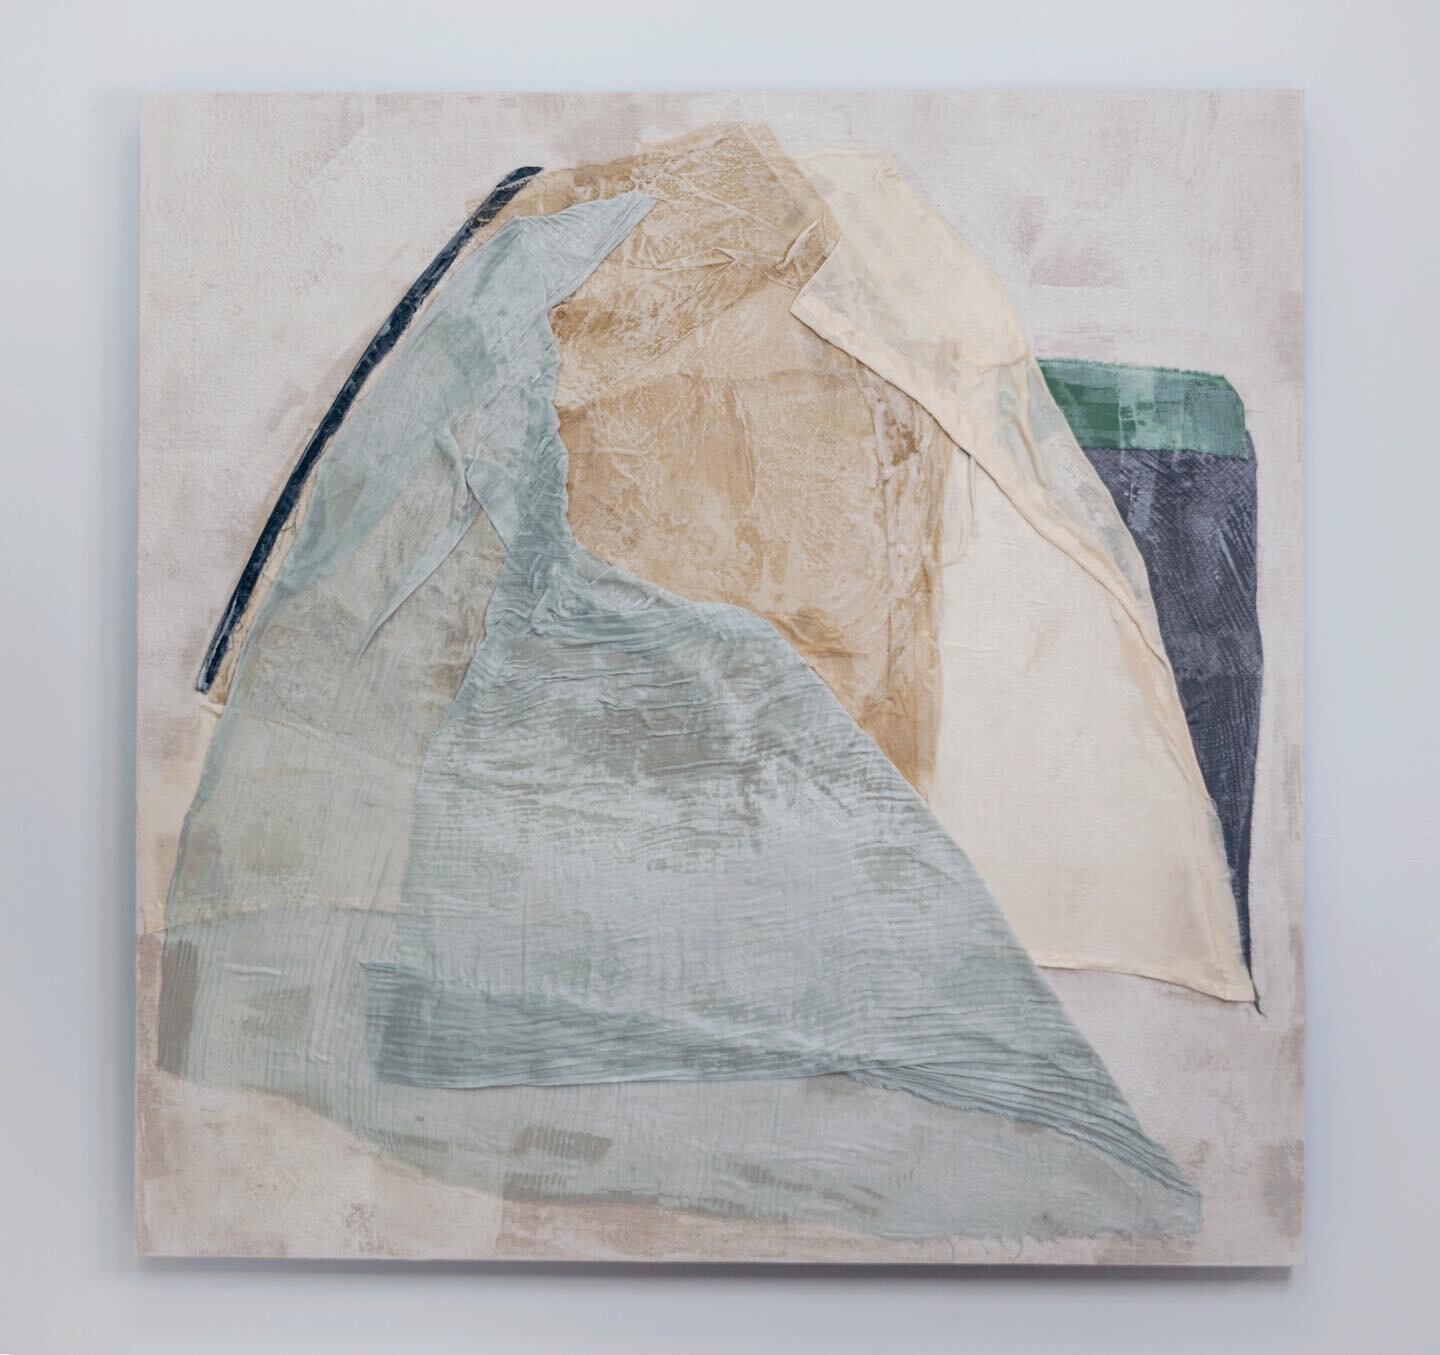 Can&rsquo;t believe next weekend is the opening for my summer exhibition at Carrie Haddad Gallery. This new series of work is filled with soft earth tones and textures created both by the wax and fabric. Enfolded Forms II, 48&rdquo;x48&rdquo;, encaus